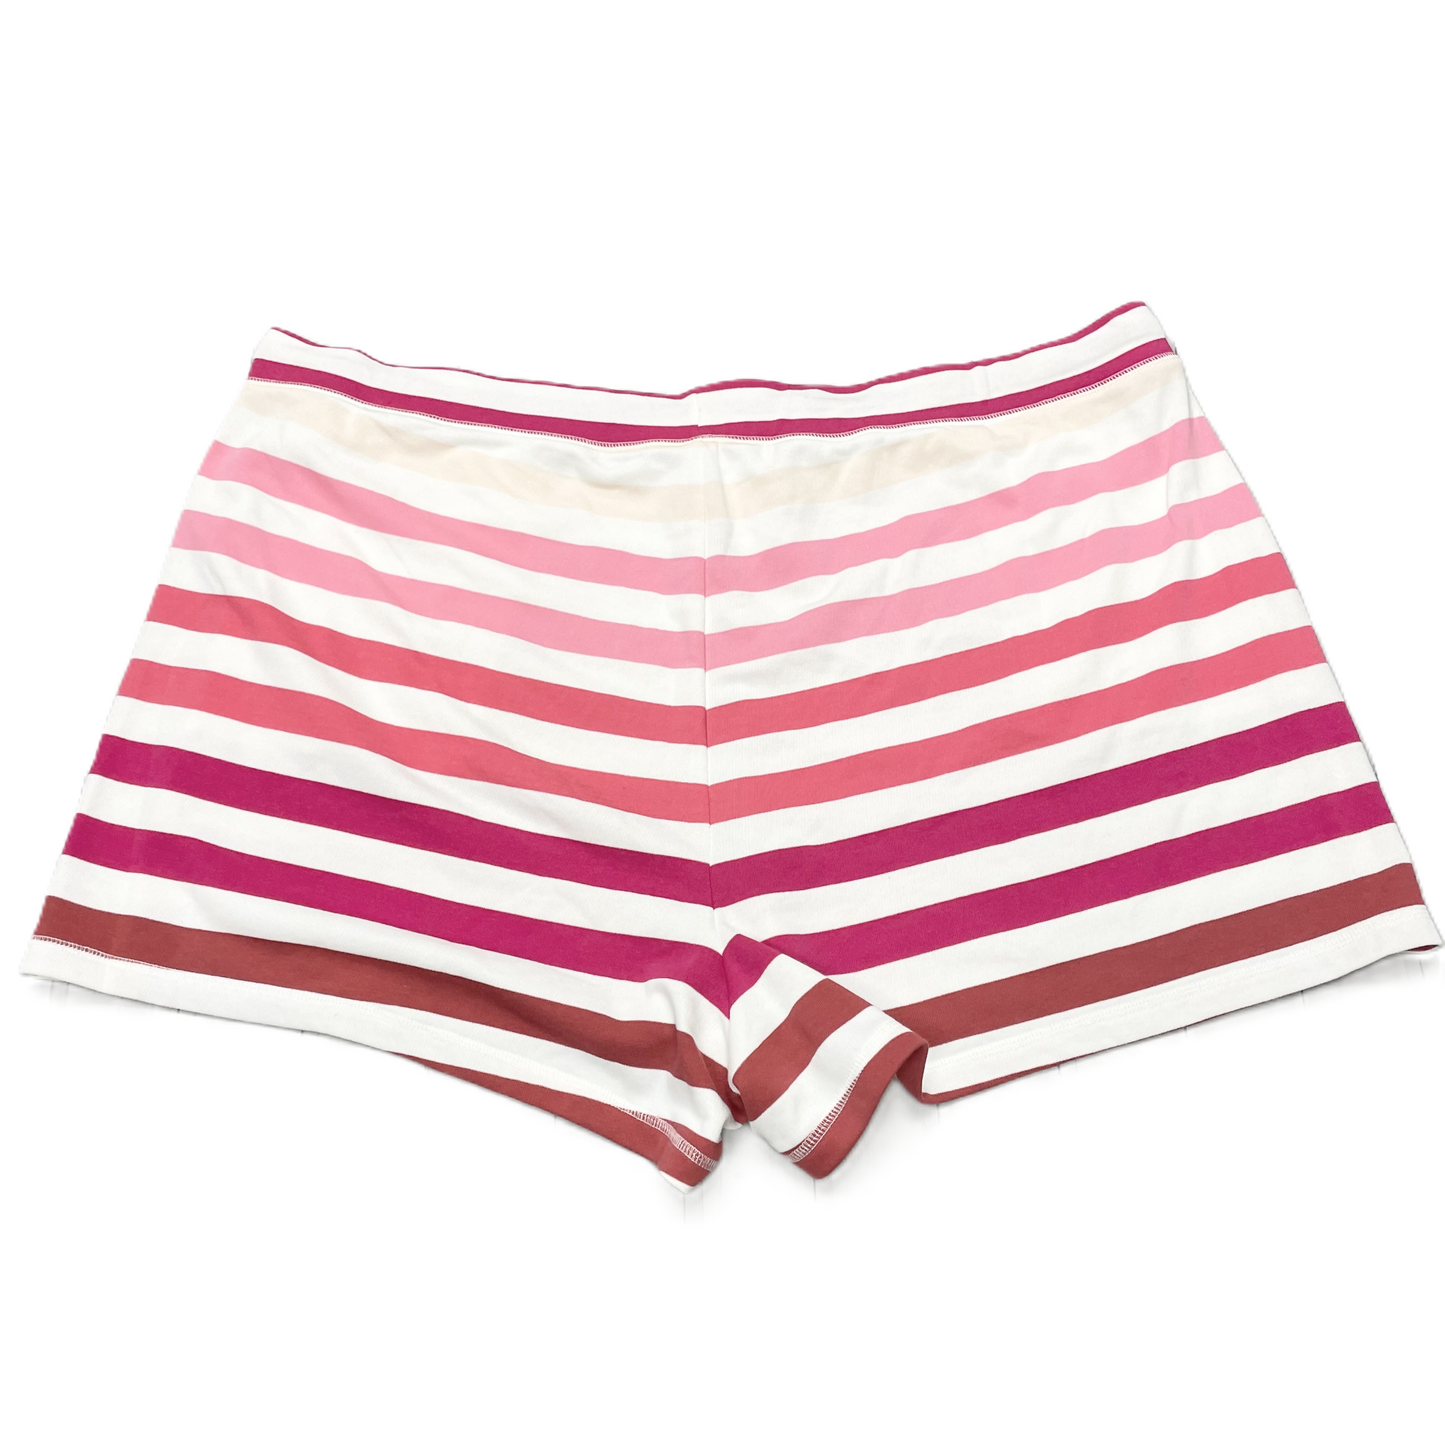 Pink Shorts By Old Navy, Size: 3x